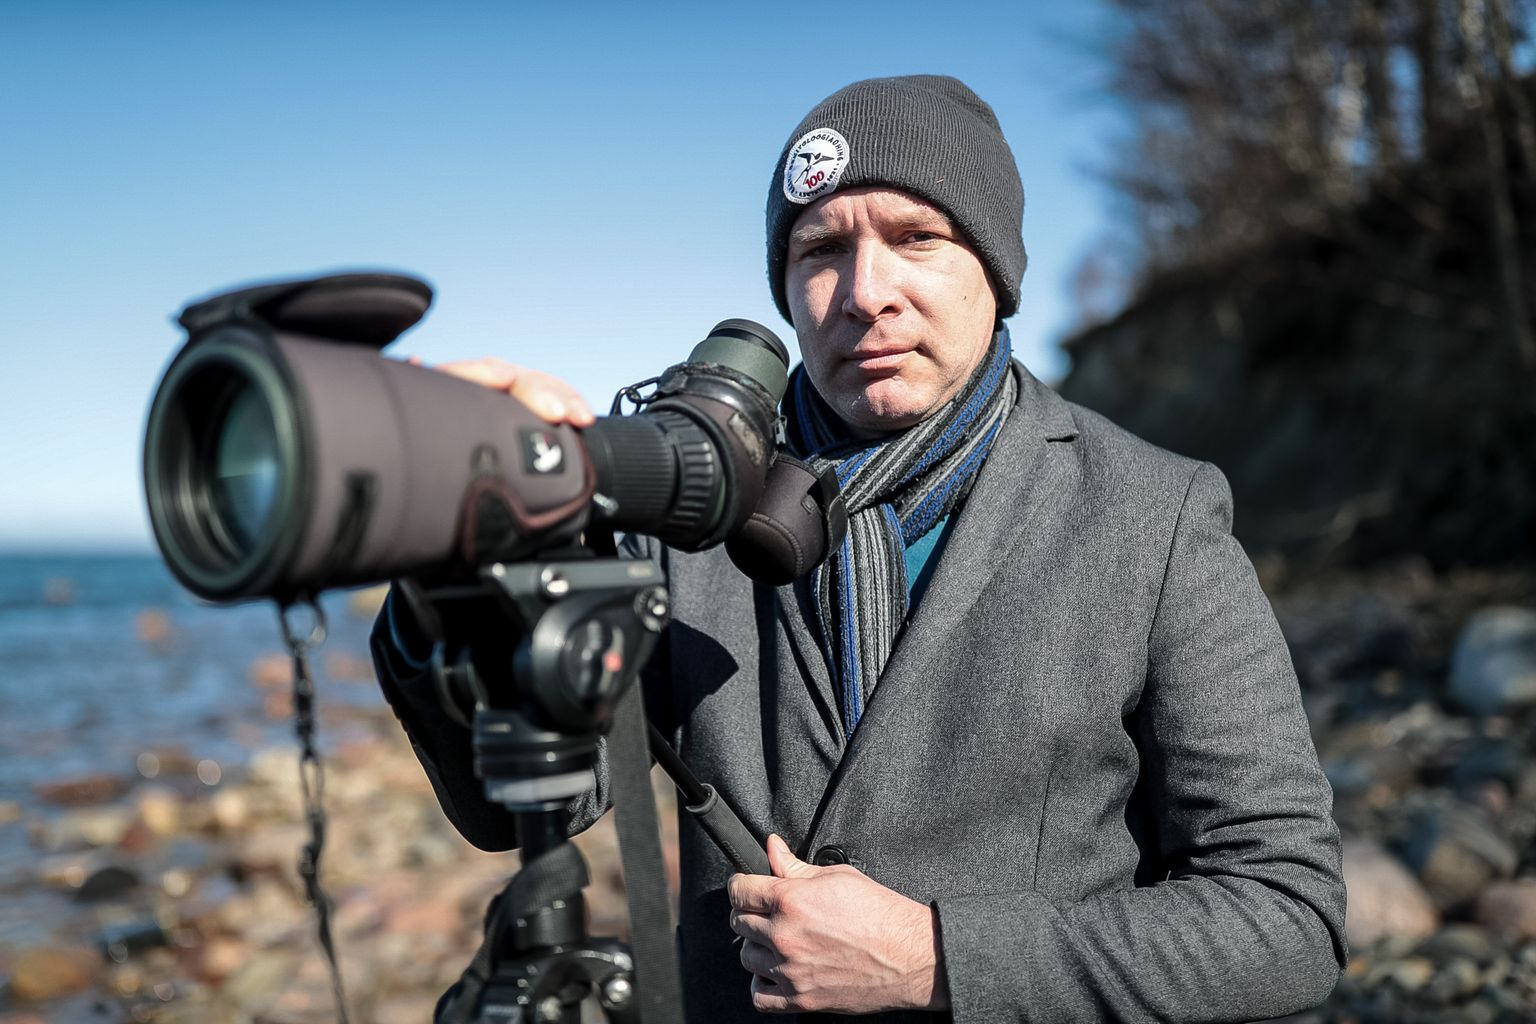 Kaarel Võhandu, a bird scientist and head of the Estonian Ornithological Society, confirms that he is not against the gas terminal in principle, but still considers it necessary to assess its environmental impact.